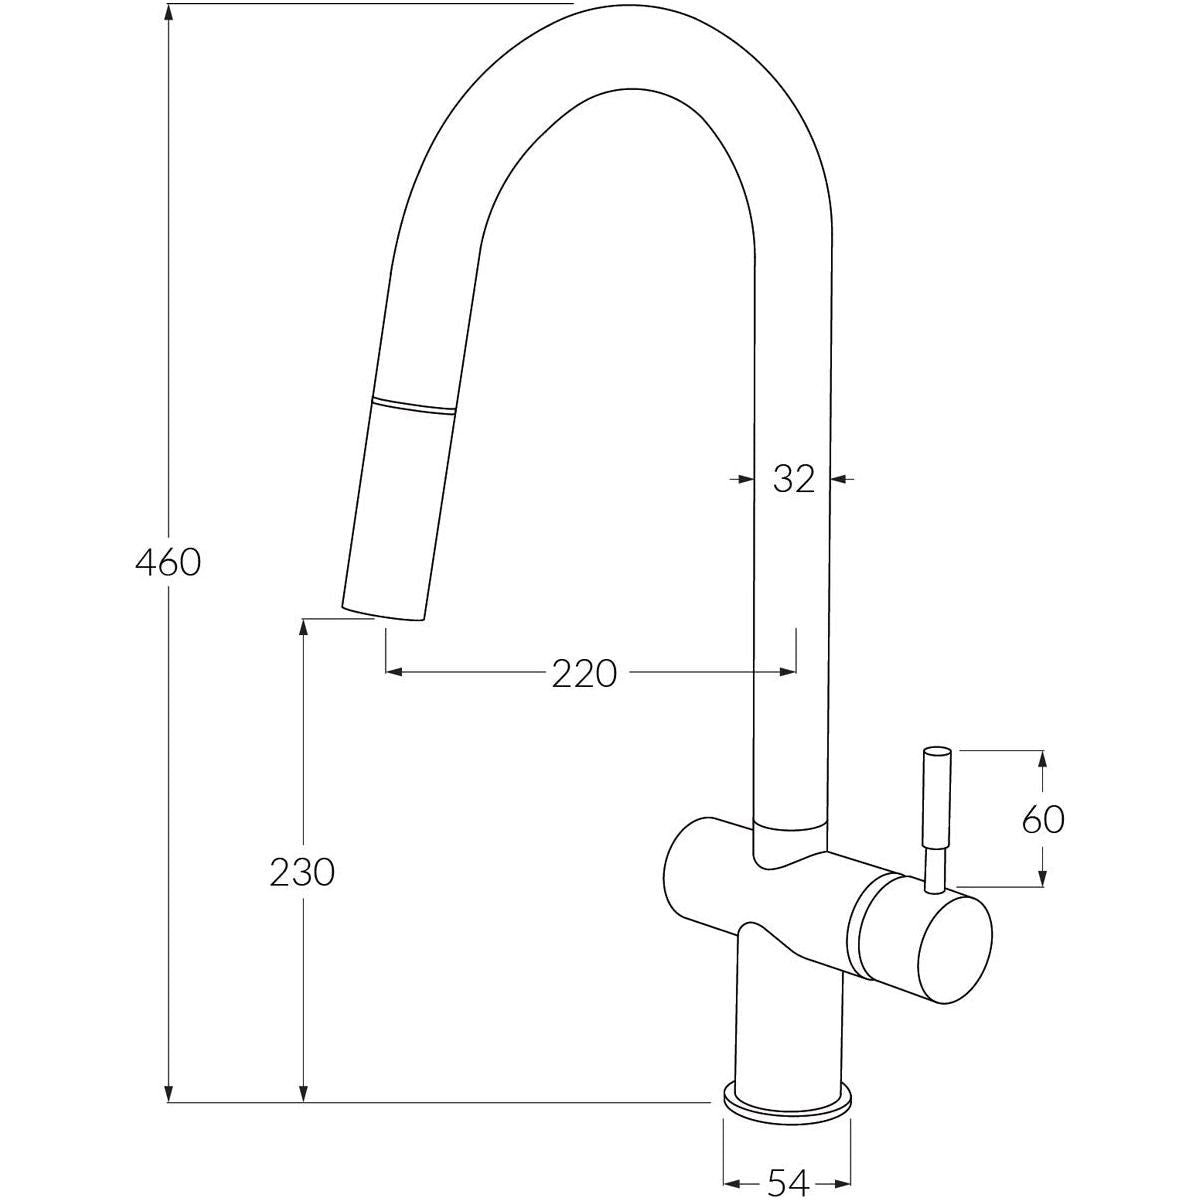 Voda Sink Mixer Pull Out